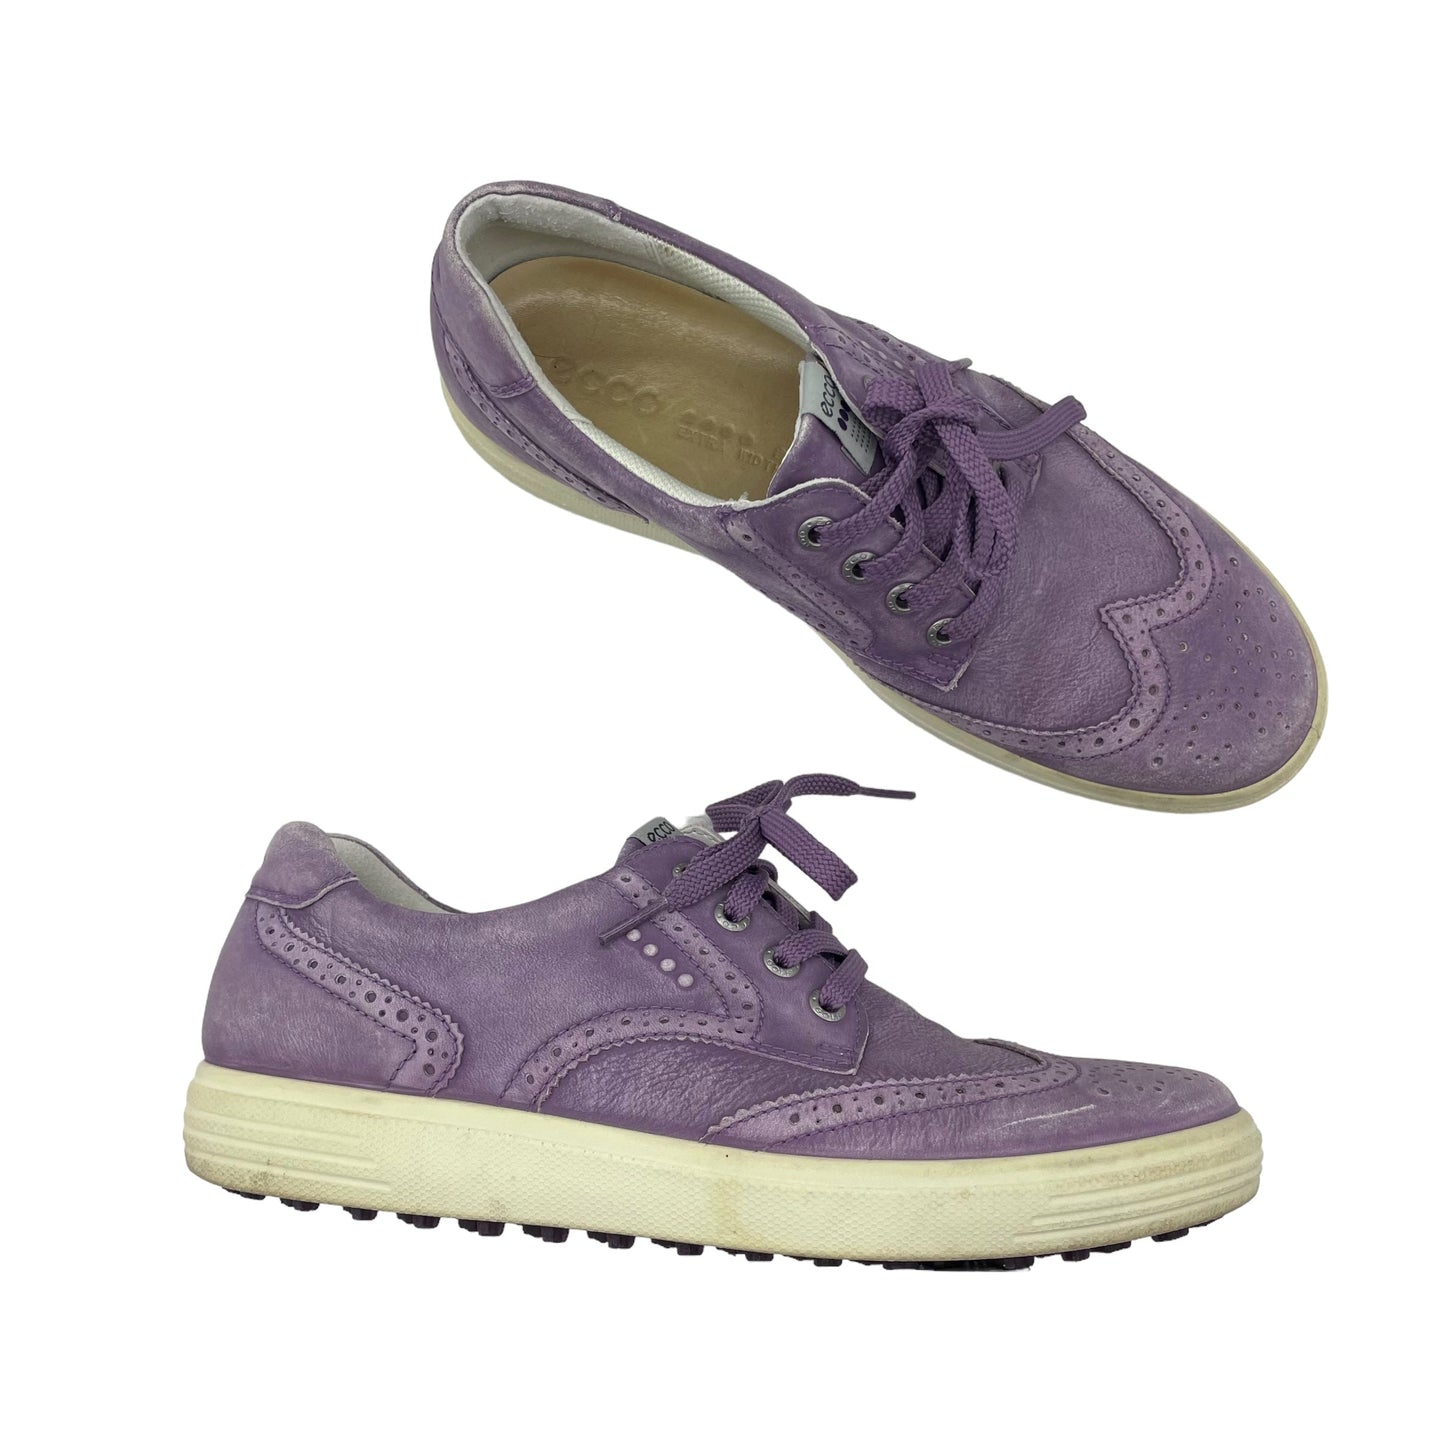 PURPLE SHOES FLATS by ECCO Size:9.5